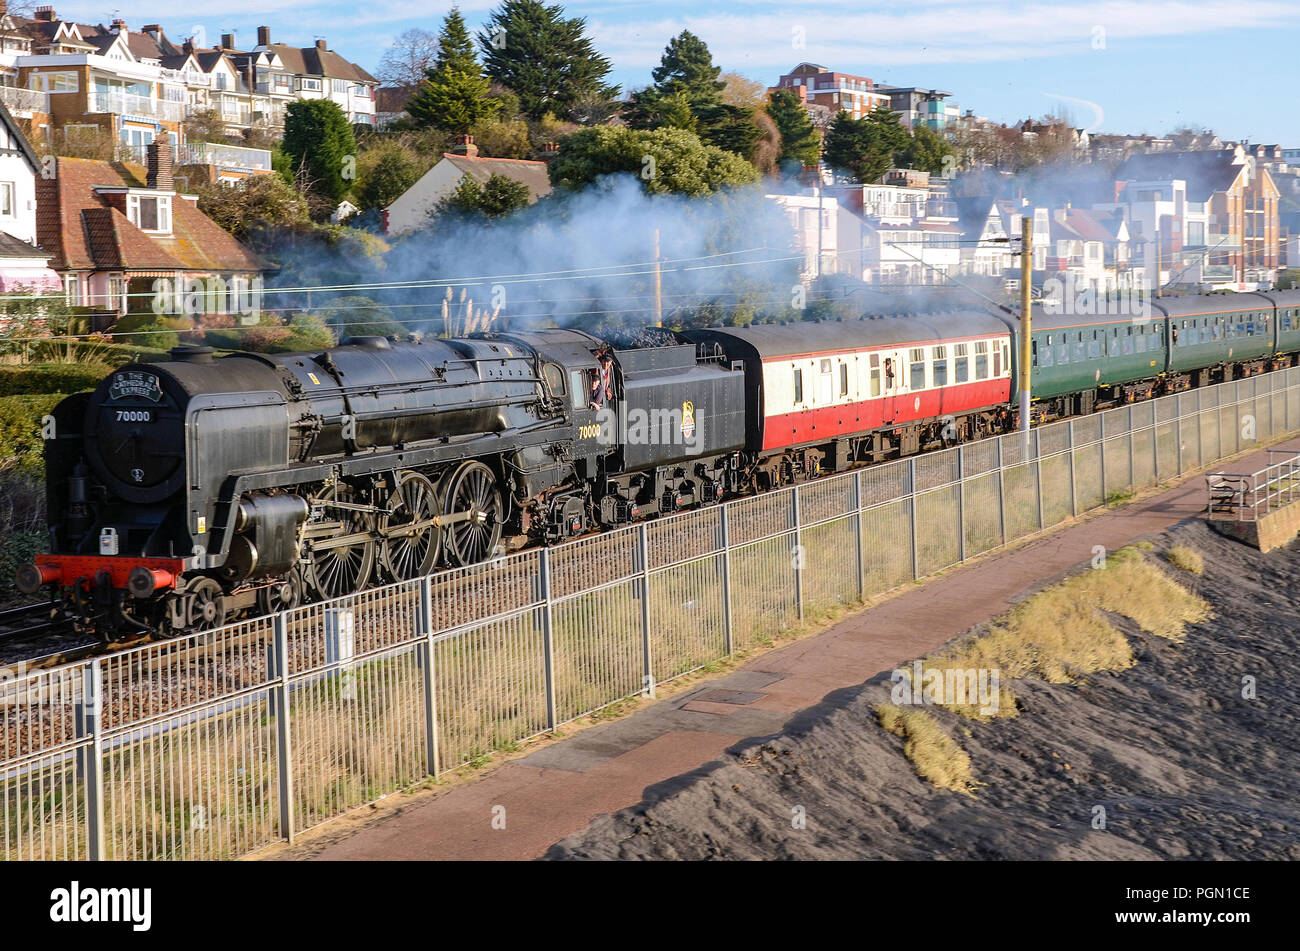 Britannia steam locomotive hauling a steam special from Southend, Essex at Chalkwell beach on C2C line by Thames Estuary. 70000 in black scheme Stock Photo